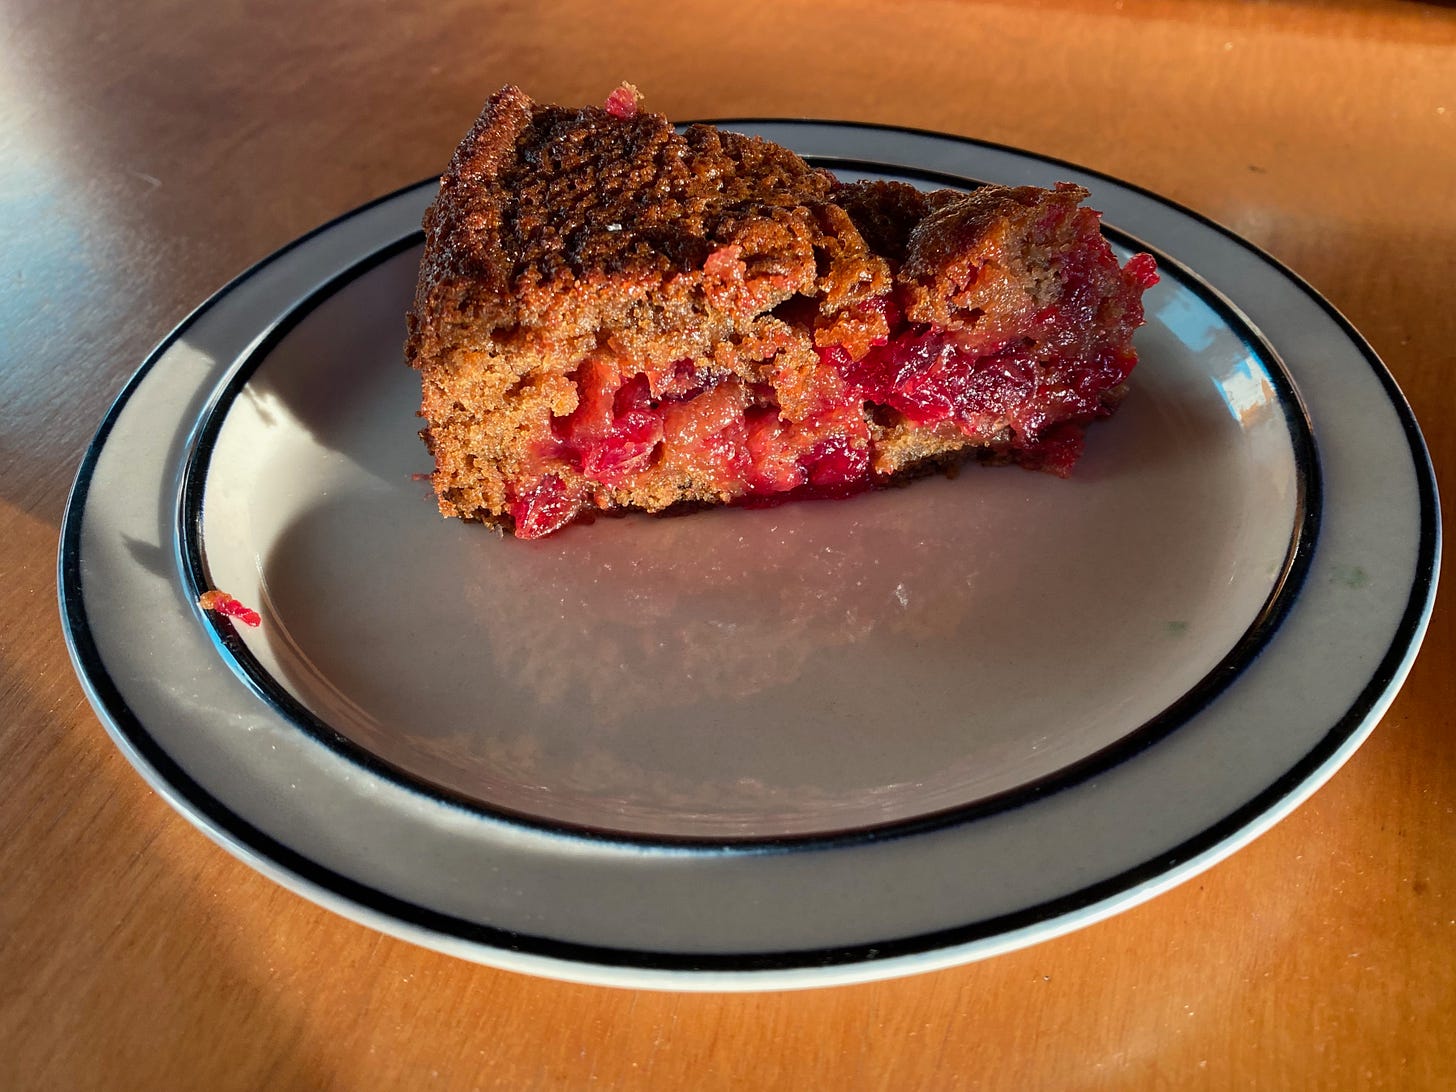 A slice of gingerbread full of bright red cranberries sits on a ceramic plate on a sunny table.